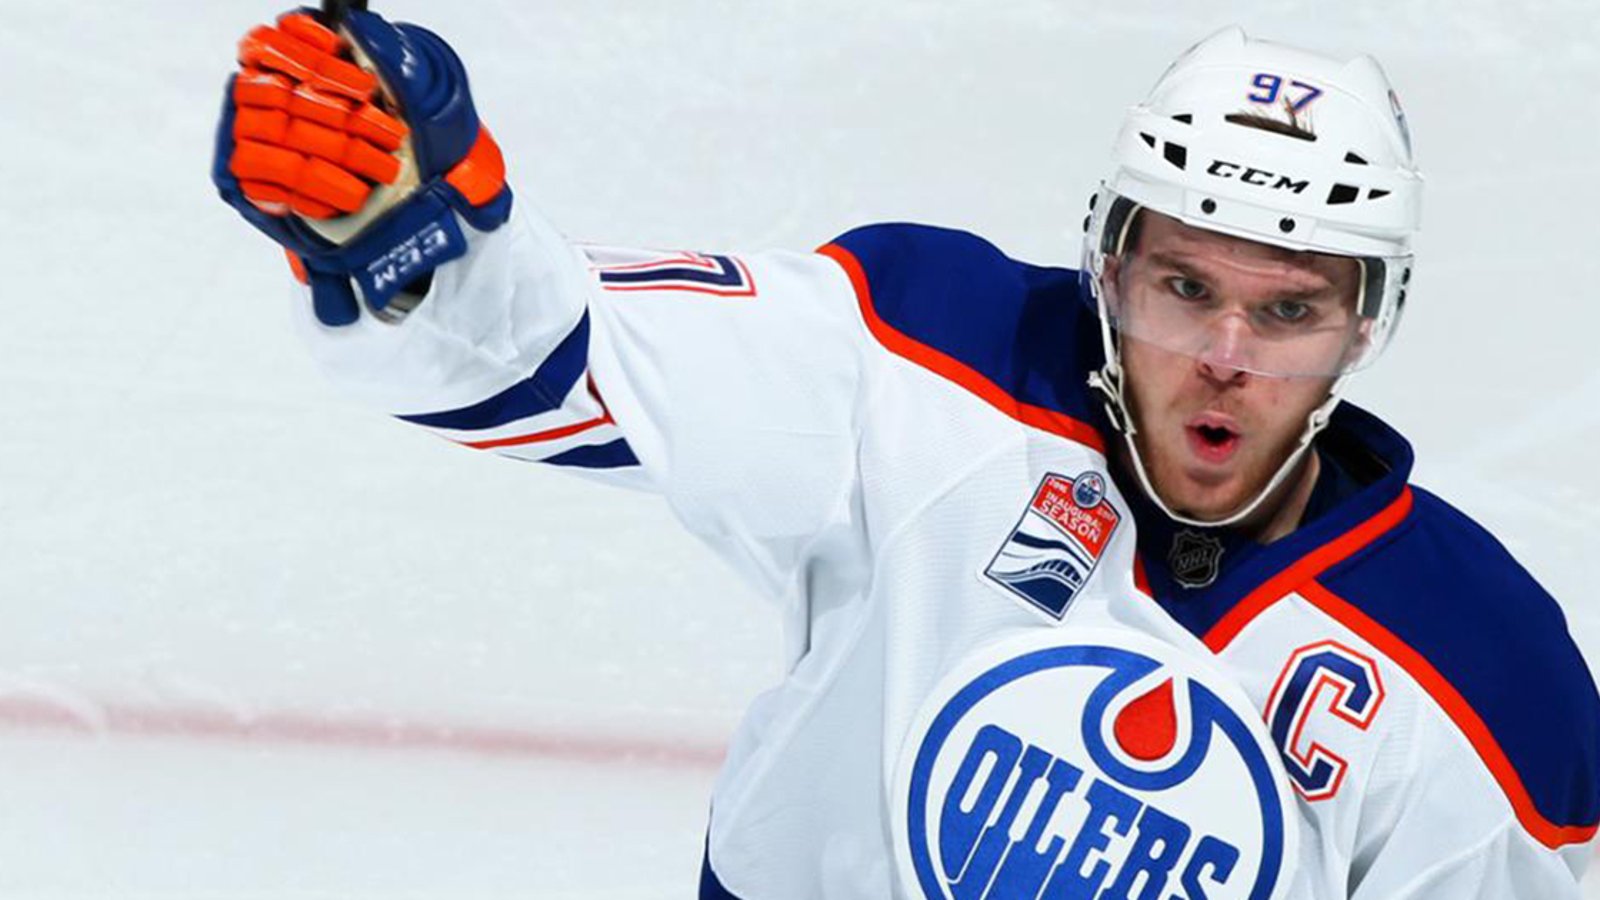 You won’t believe what McDavid did immediately after signing his $100 million deal